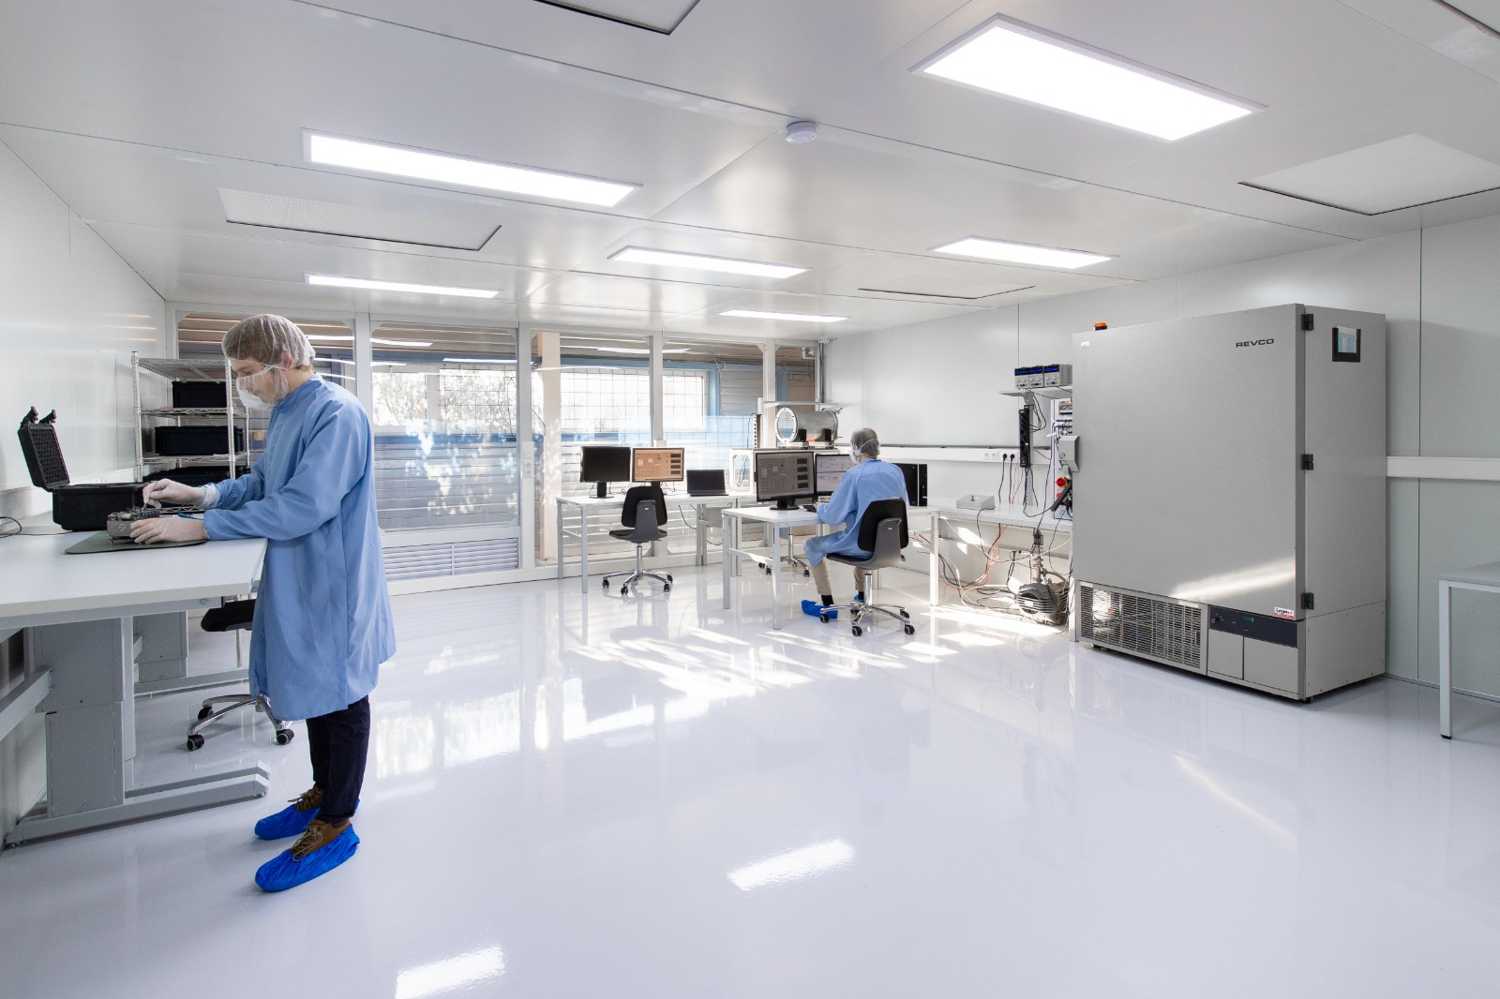 Cleanroom facilities for integration and testing of turn-key propulsion system